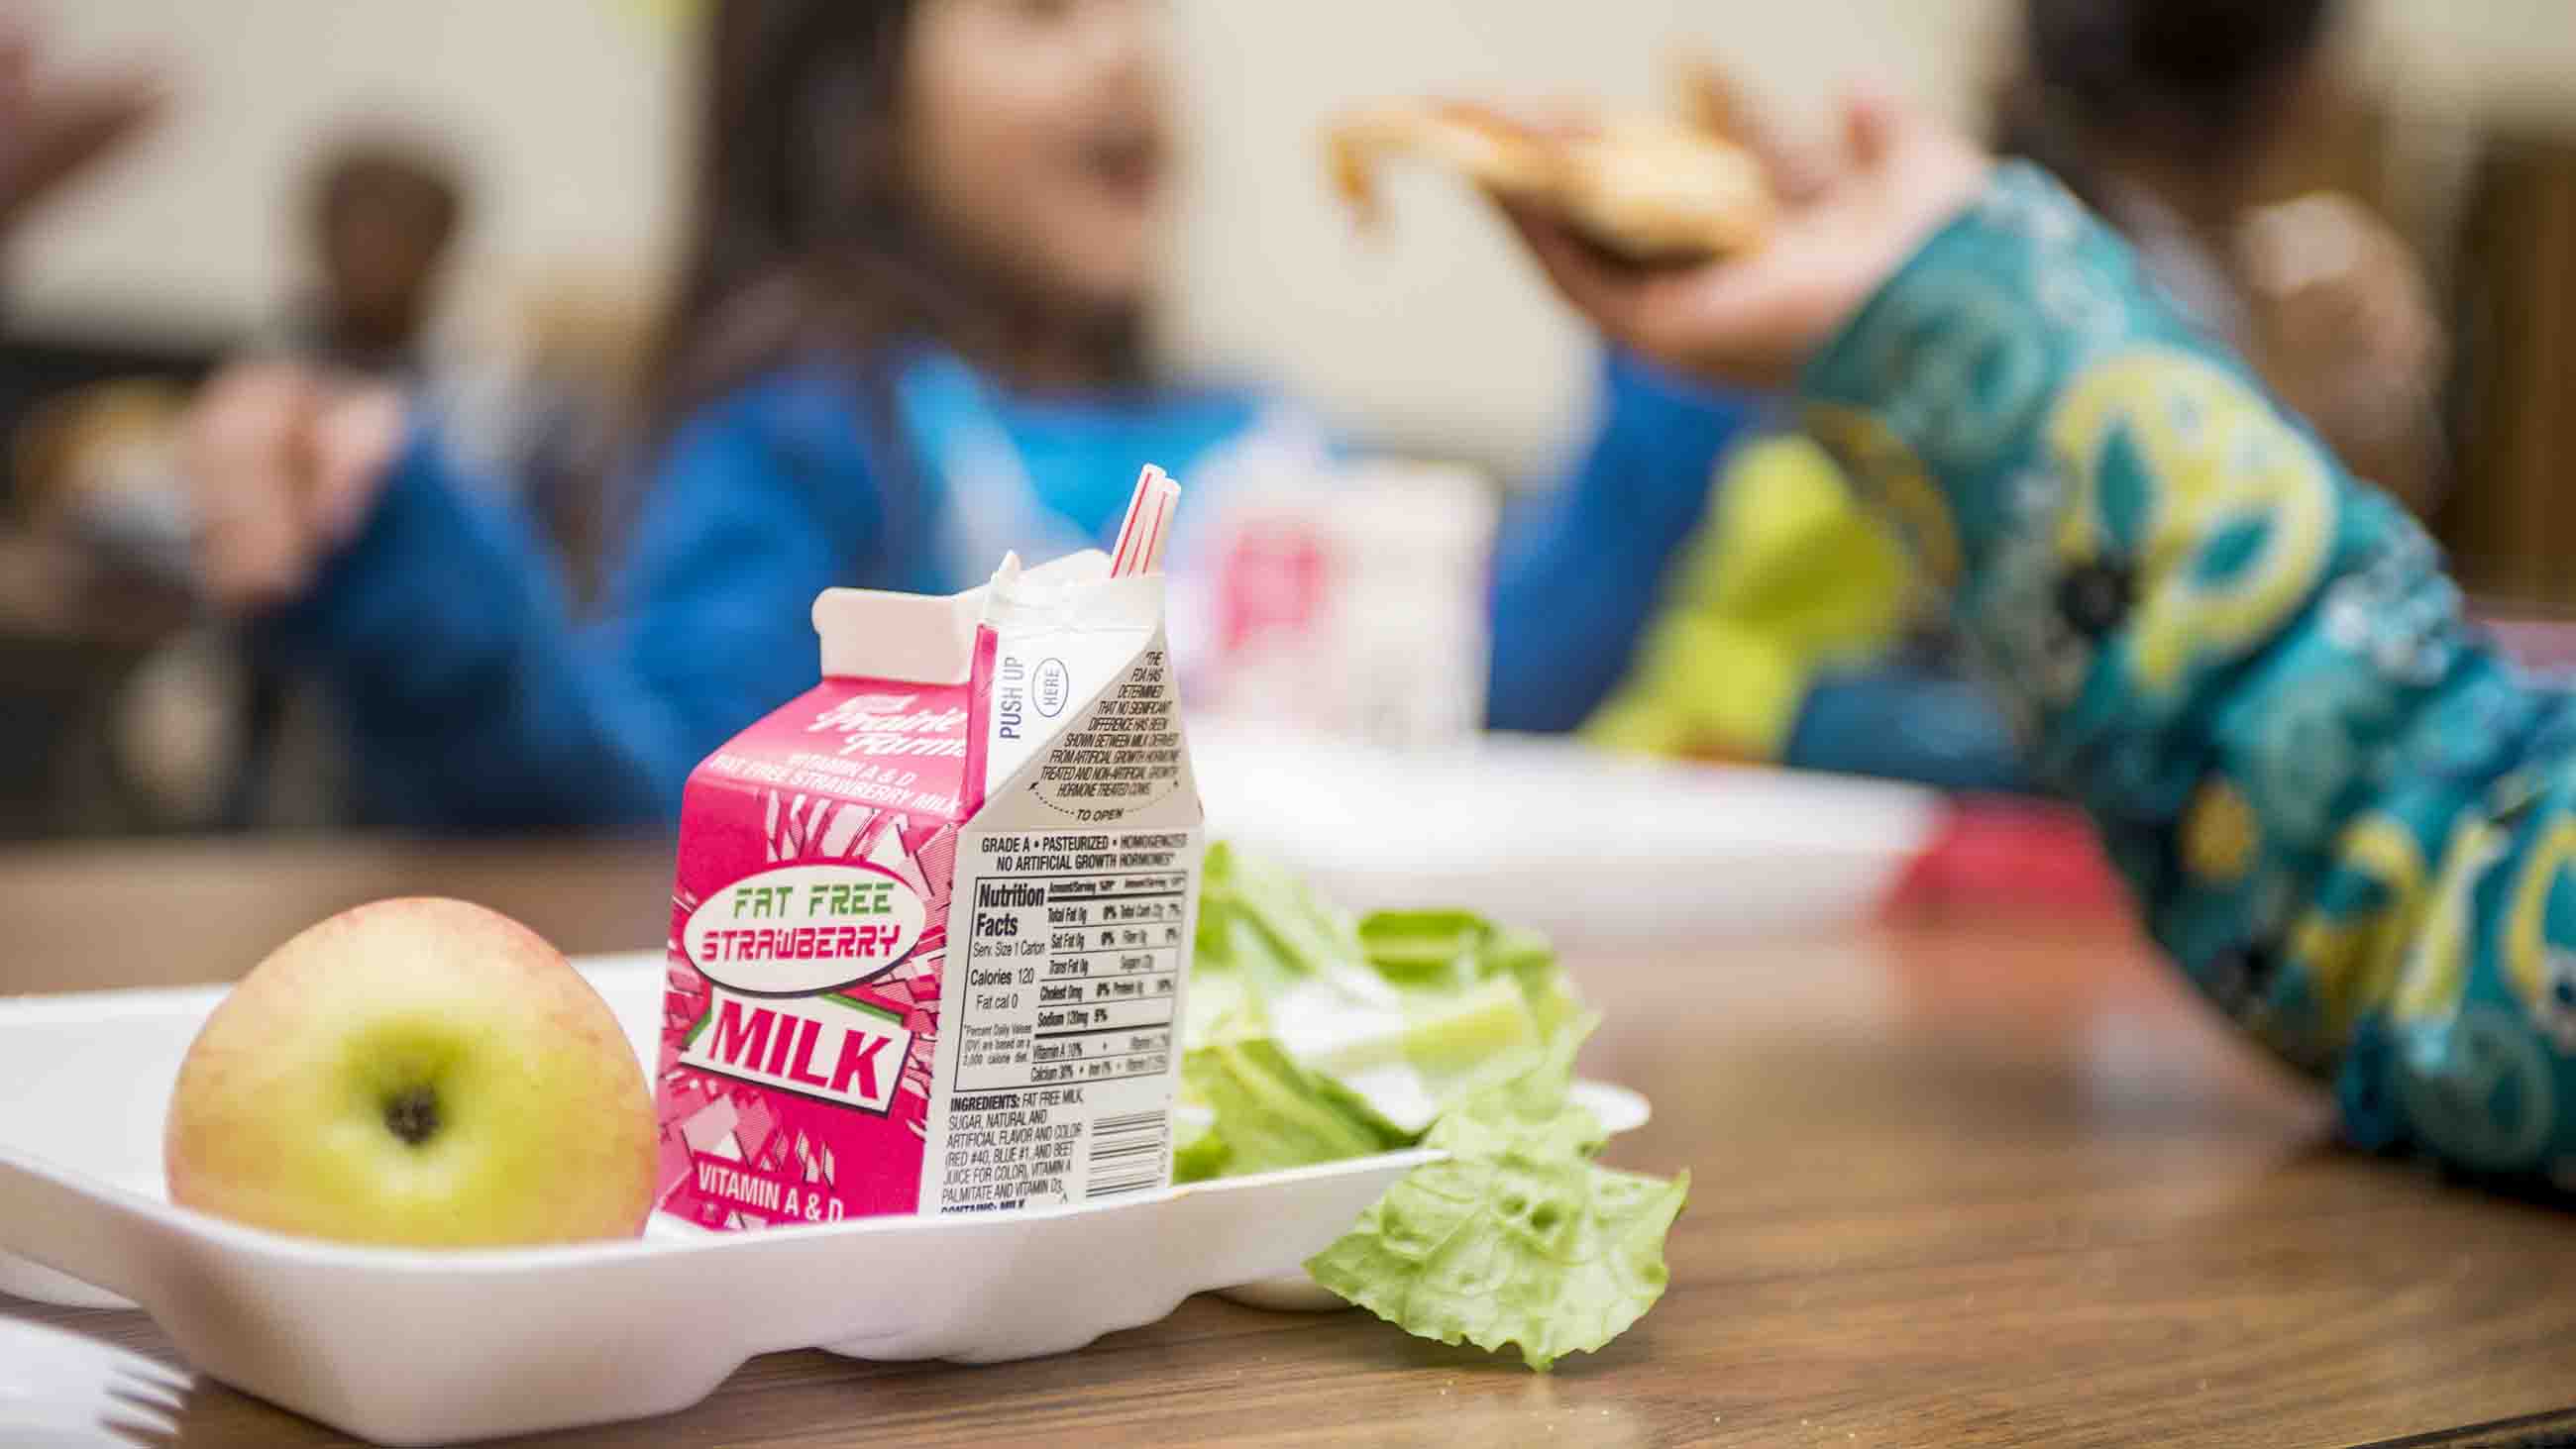 Federally subsidized school lunches were made healthier under Obama-era legislation, though critics have derided the move as counterproductive. A new study suggests otherwise.